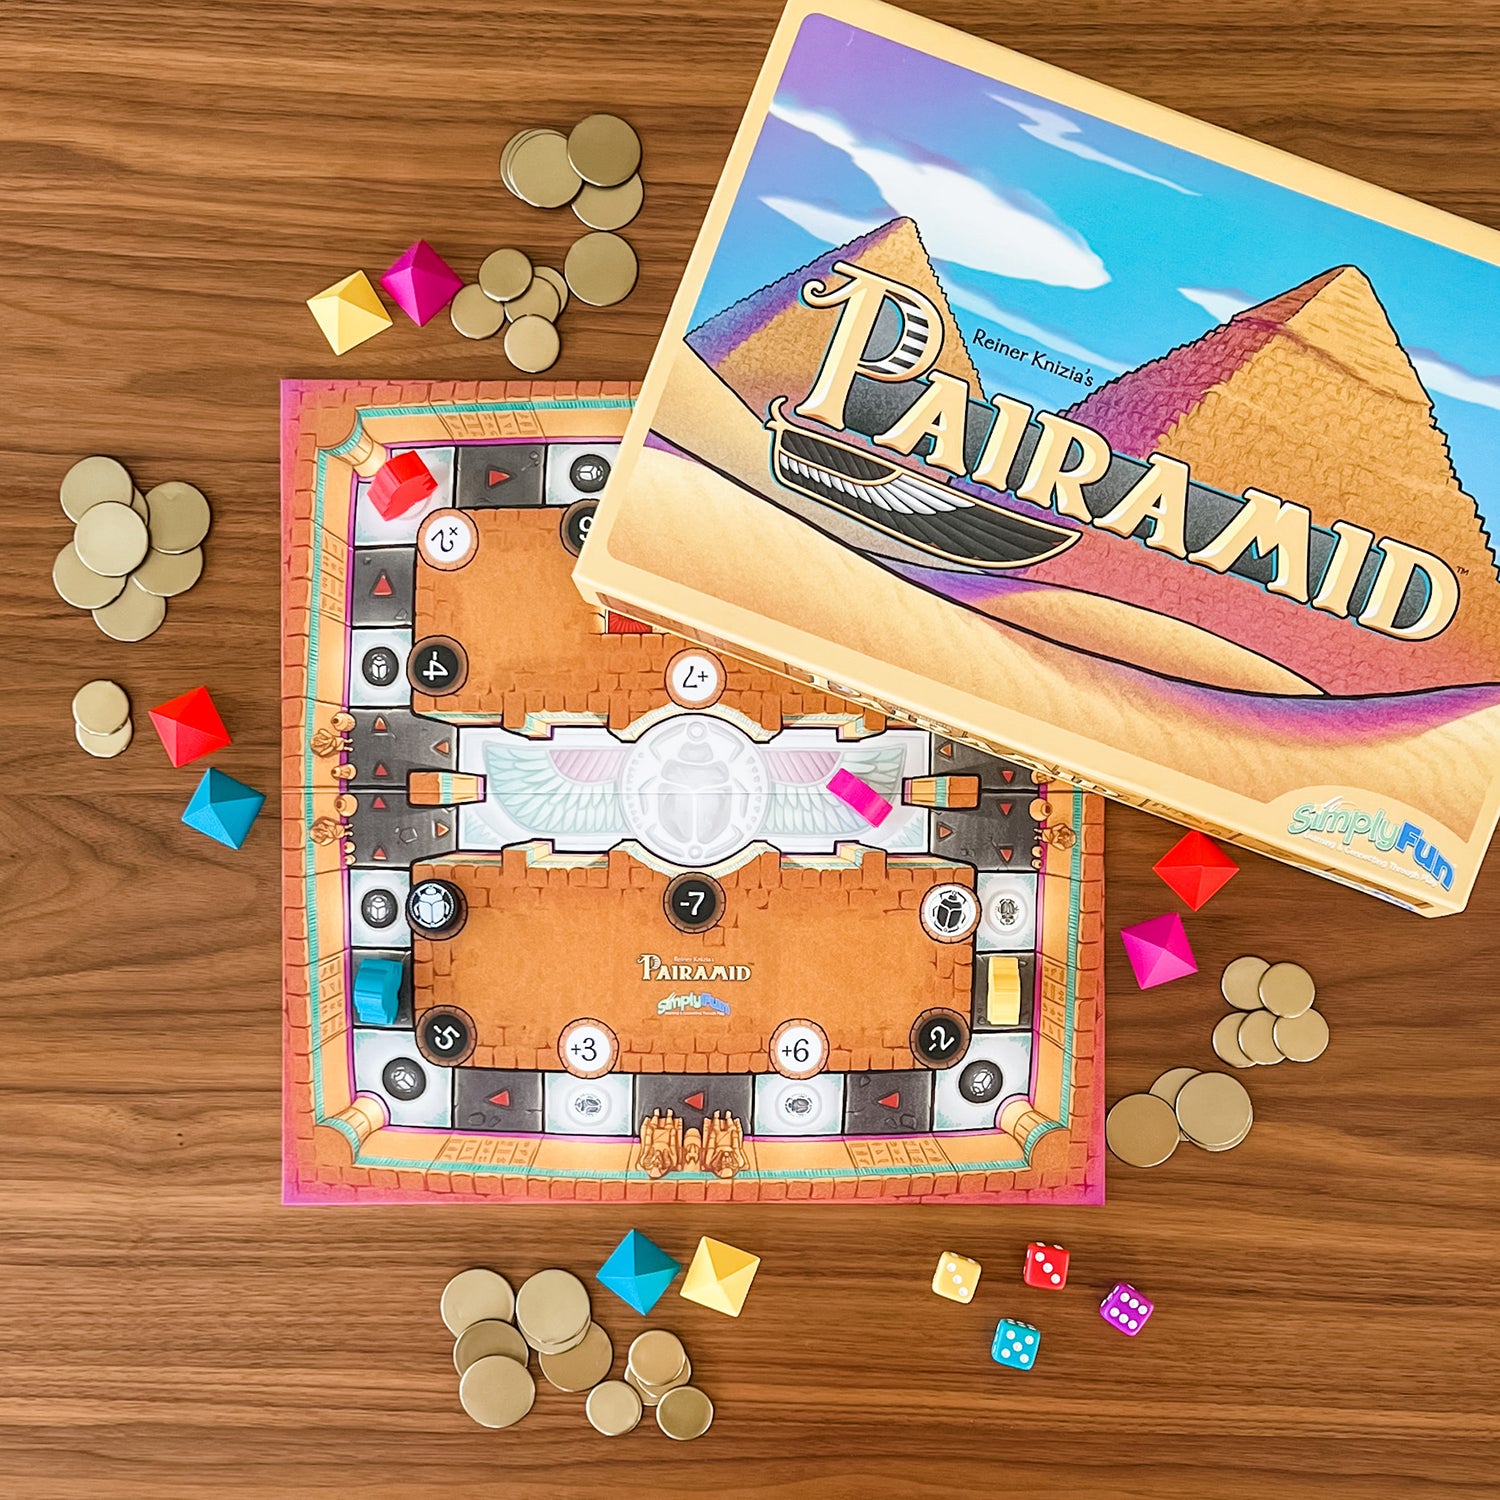 Pairamid by SimplyFun is a collaborative planning game for ages 8 and up.